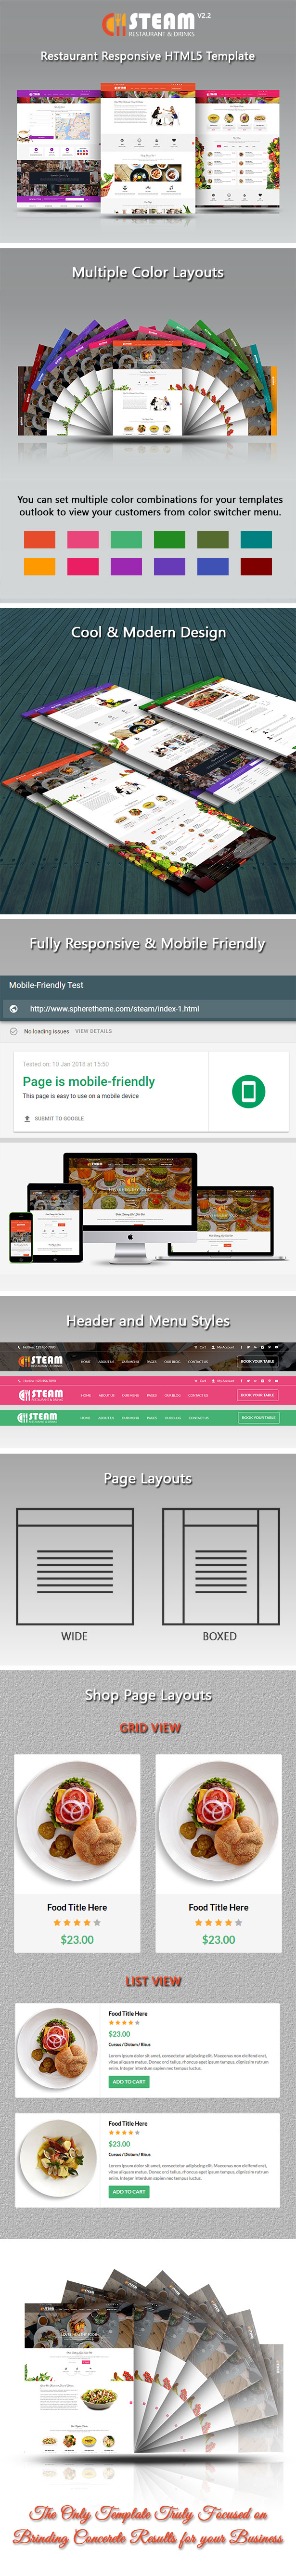 Prefect for RESTAURANT, Bakery, Cafe, Bar, Catering, food business and for personal chef portfolio website